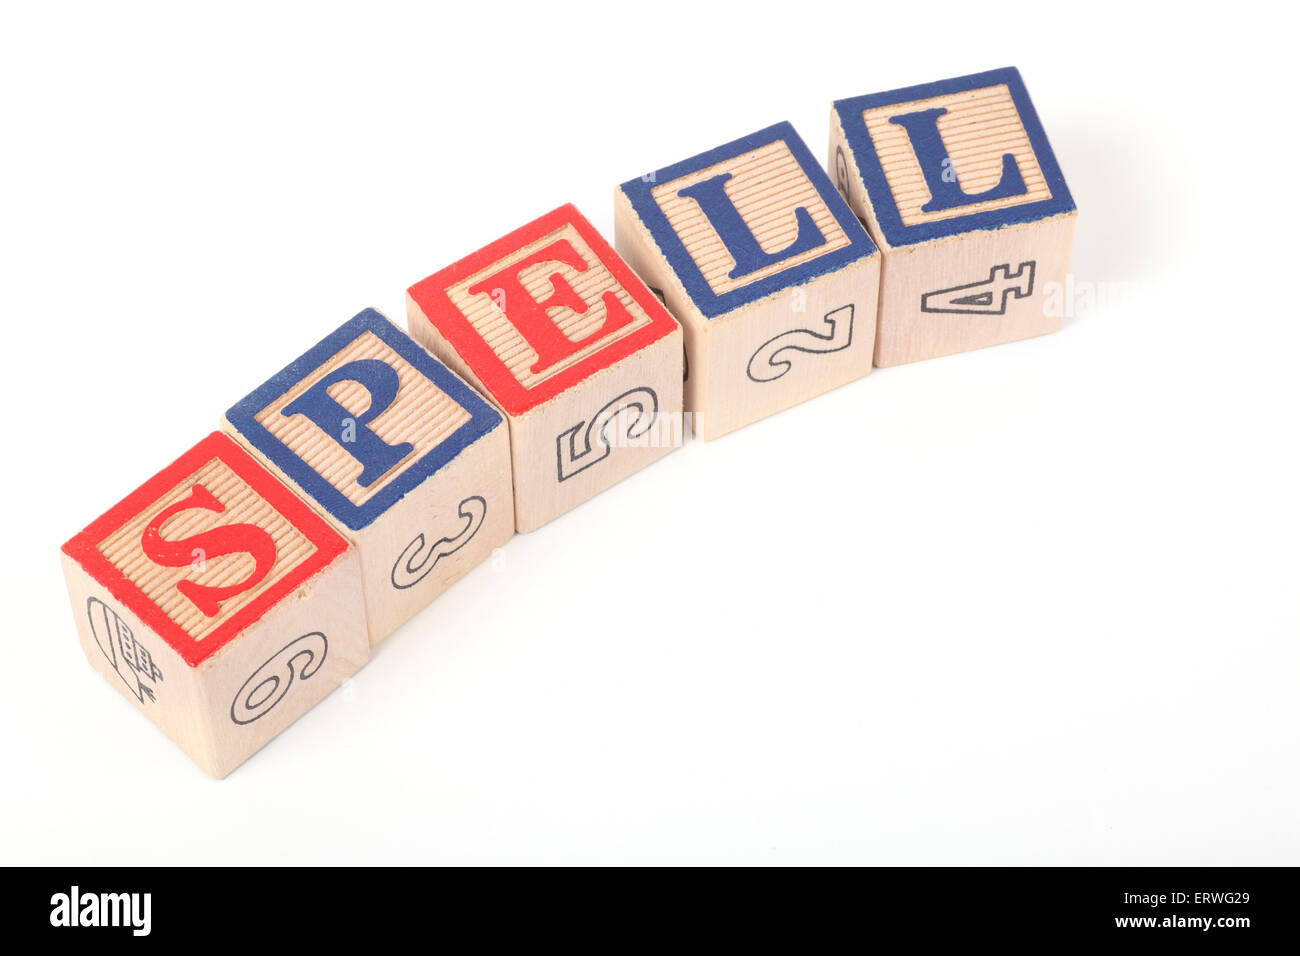 The word 'SPELL' spelt out with Children's building blocks Stock Photo